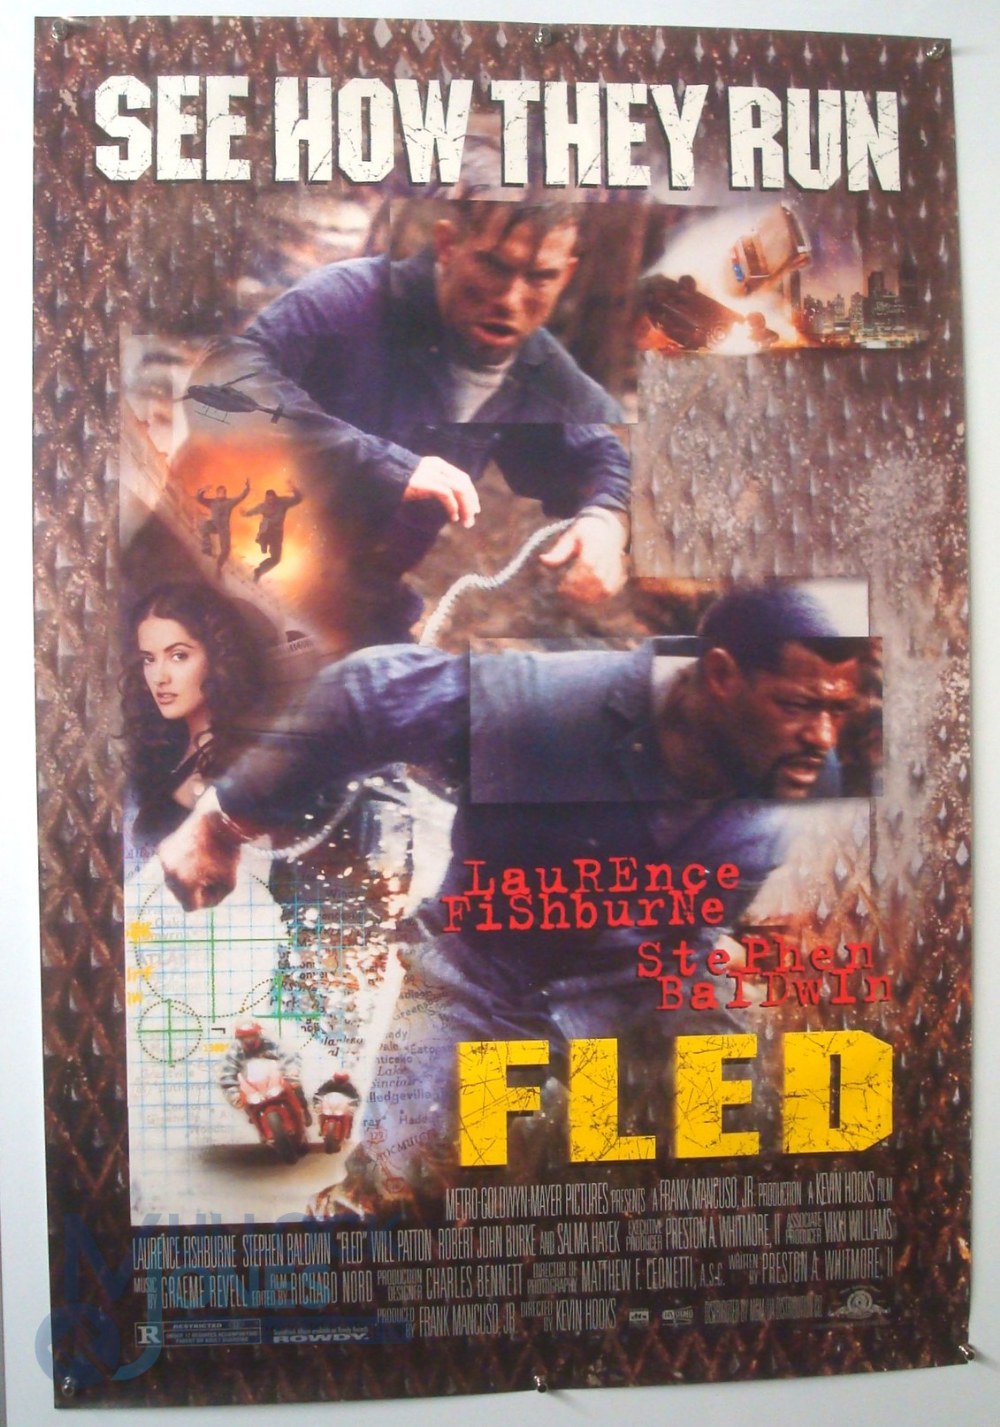 Original Movie/Film Poster - 1996 Fear and 1996 Fled - 40x30" approx. kept rolled, creases apparent, - Image 2 of 2